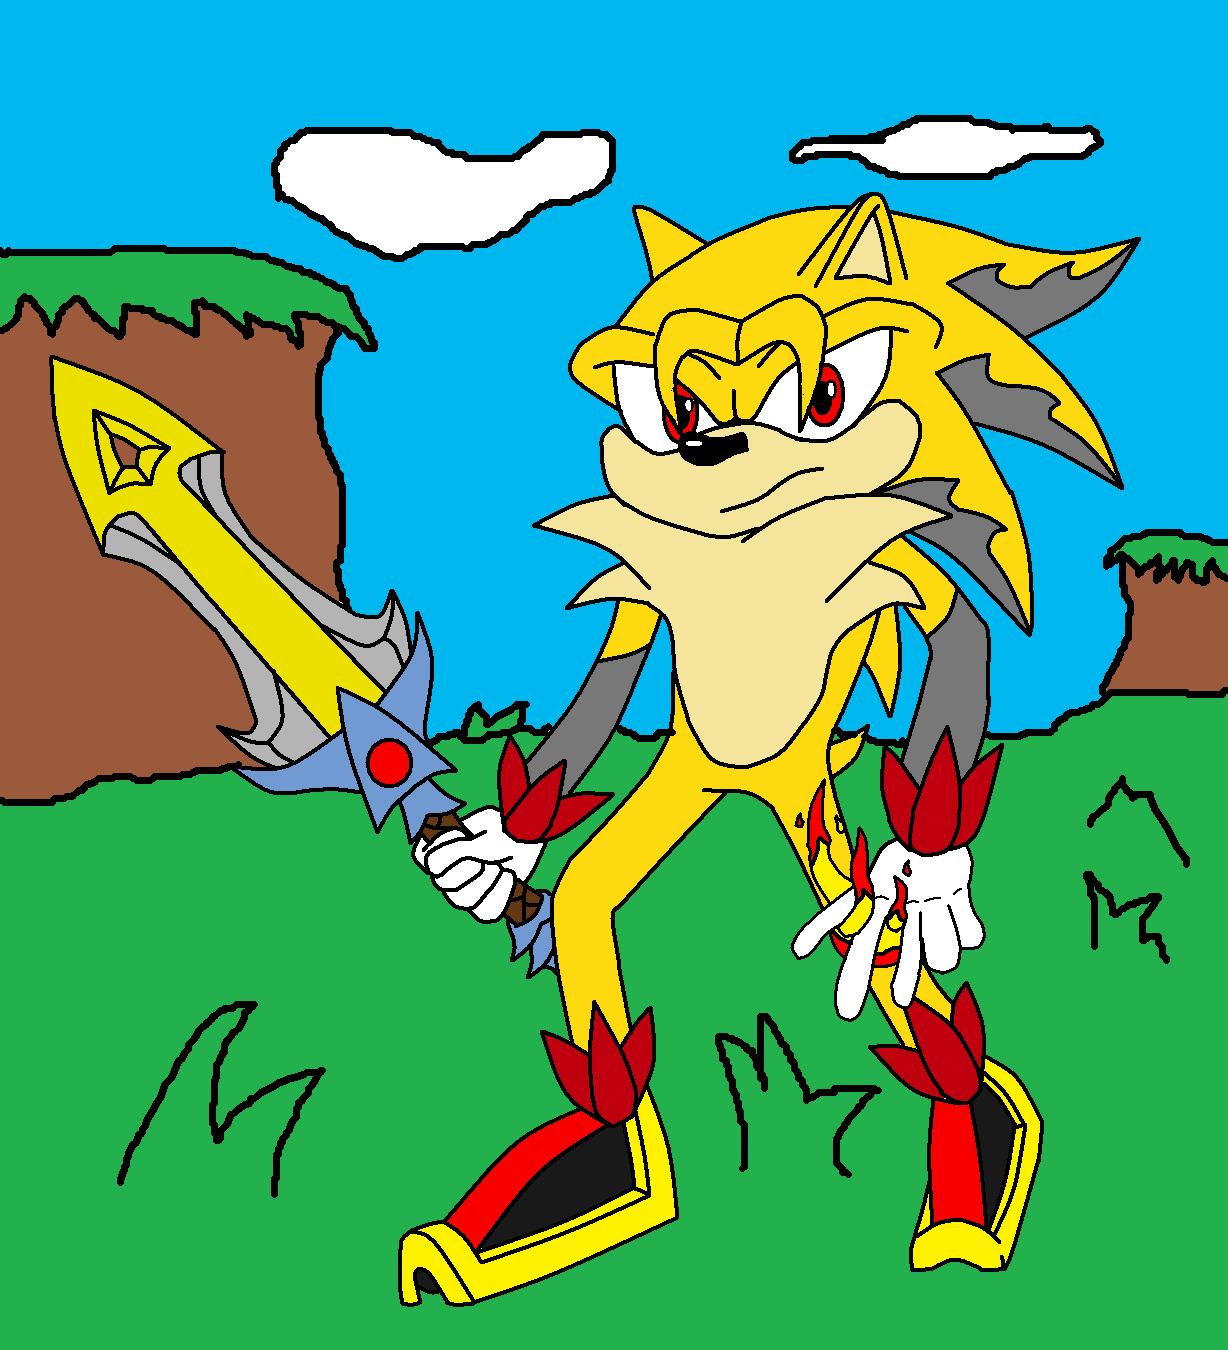 Skid finished MS Paint by SkidSpeed